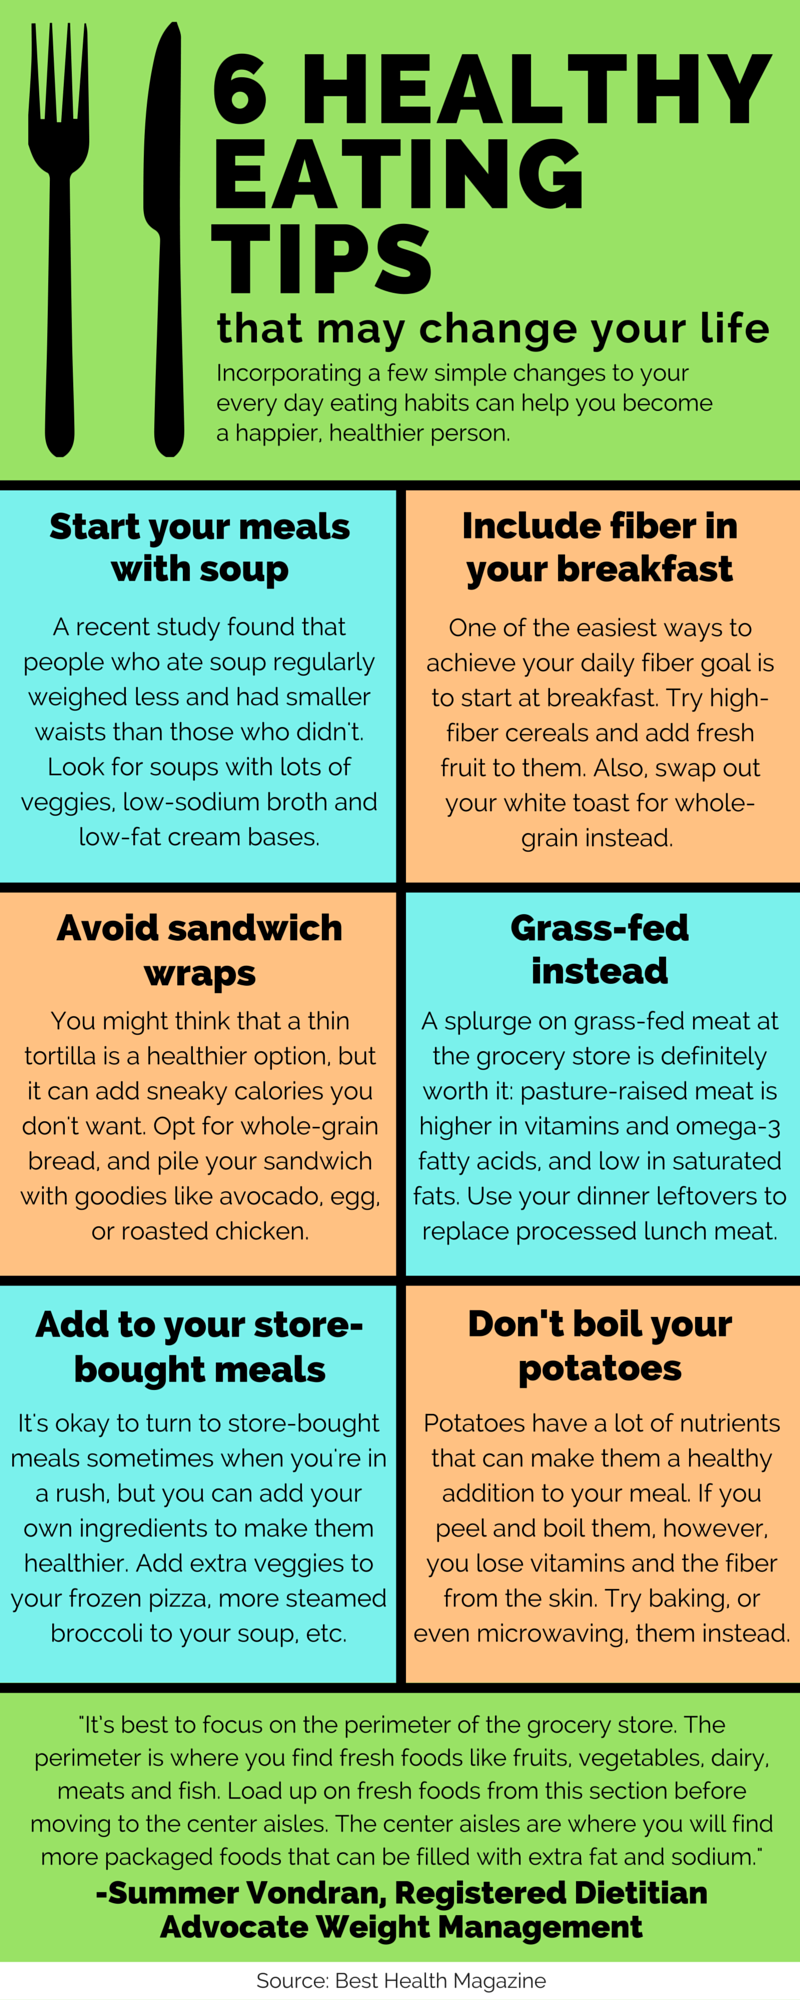 6 Healthy eating tips2